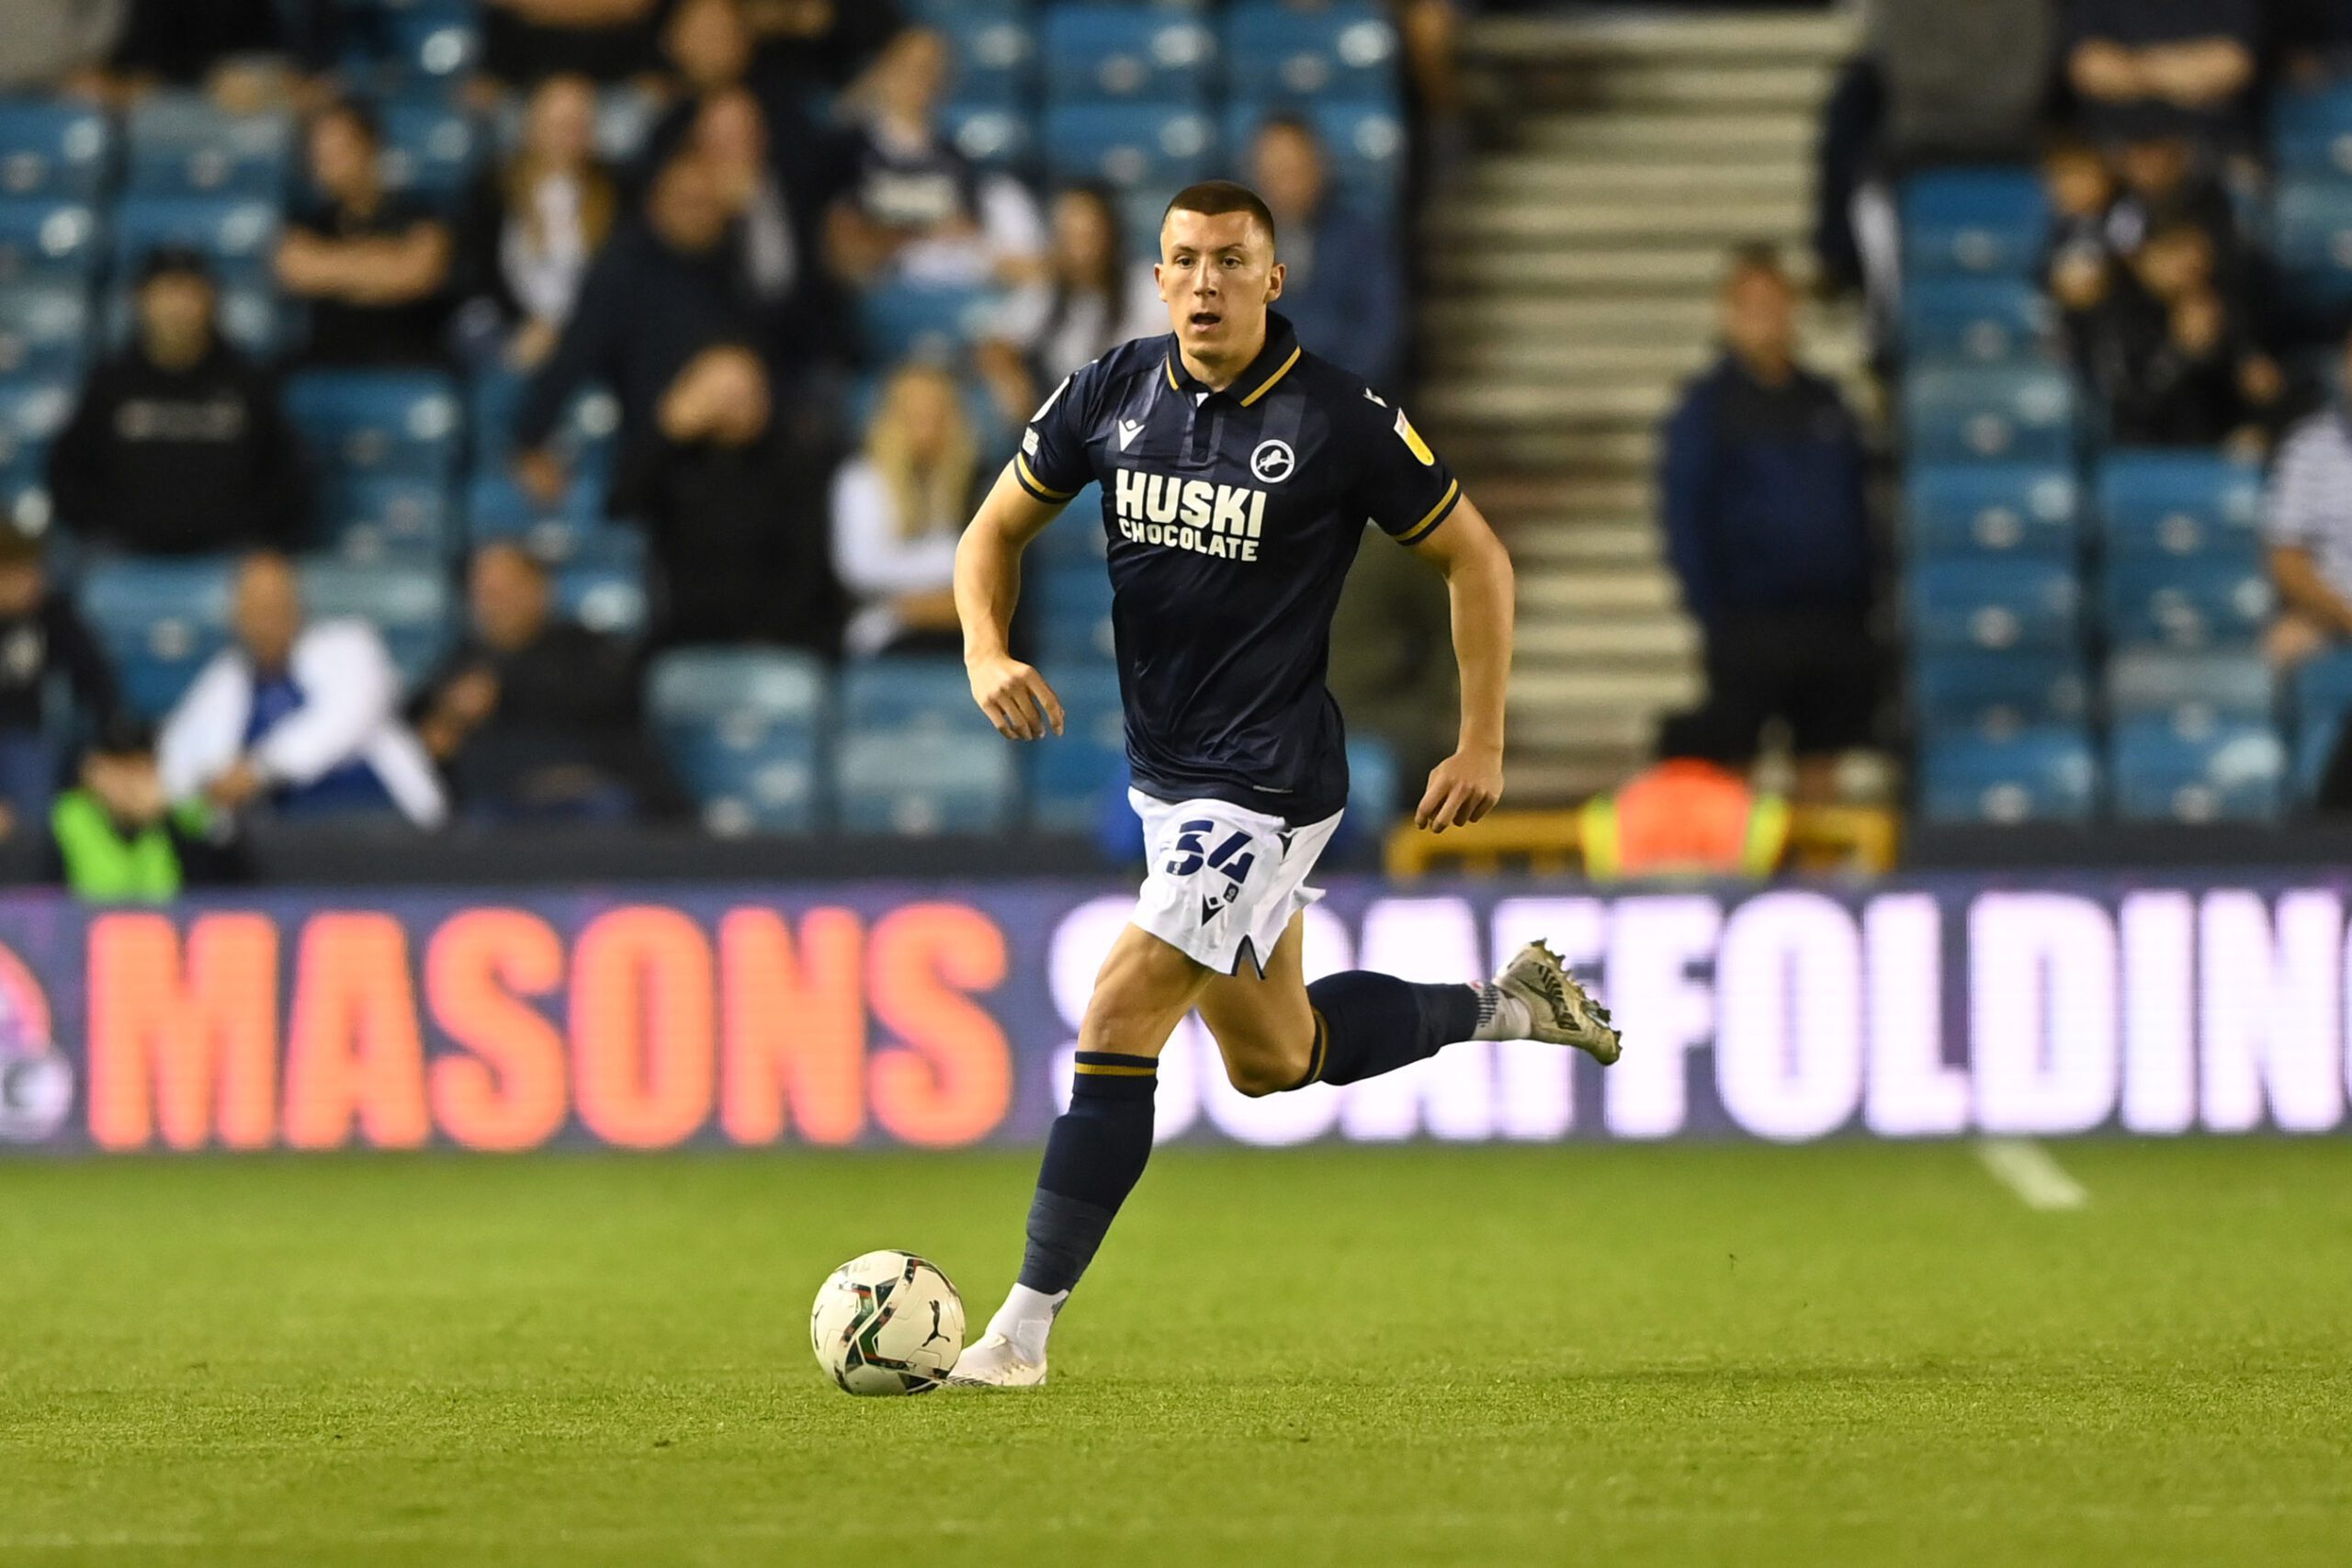 Another promising Millwall young player sent out on loan